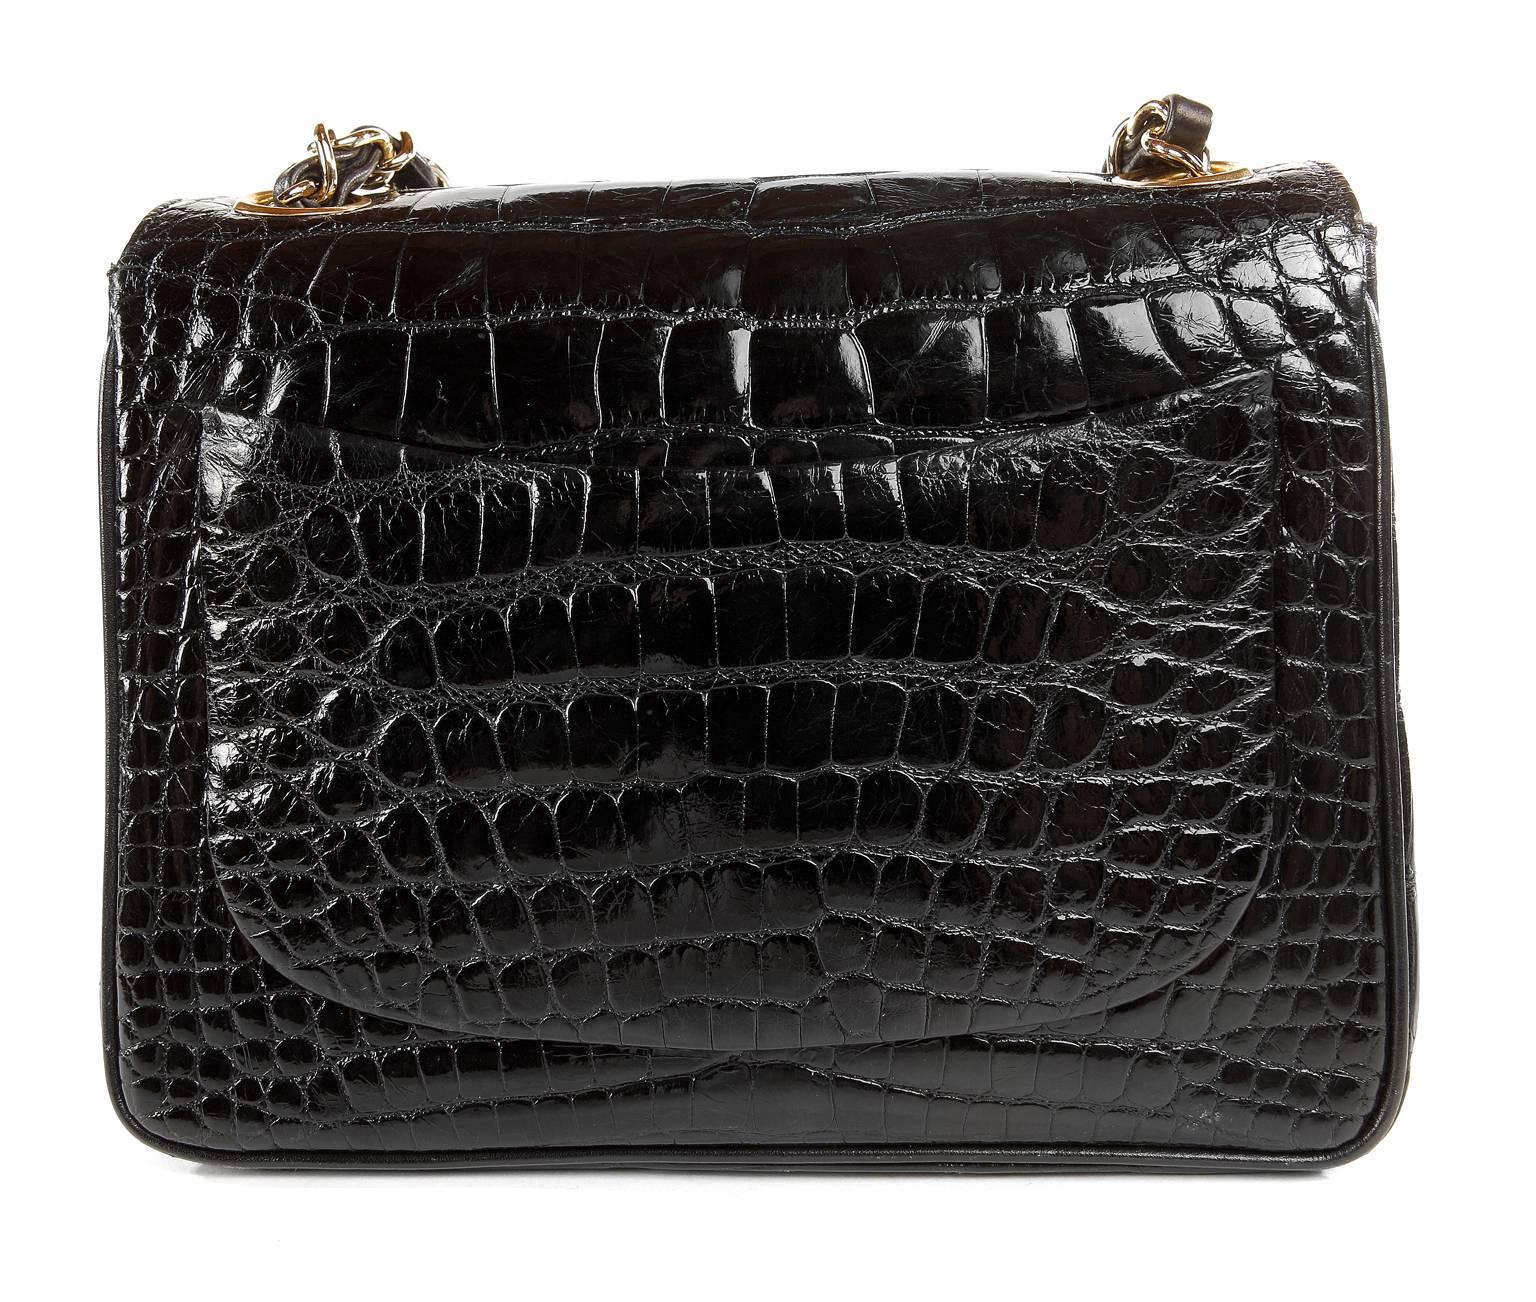 Chanel  Black Crocodile Mini Classic Flap Bag- PRISTNE Vintage Condition
 The most exclusive of all exotics, the Mini Classic in black crocodile with gold hardware is a collector’s dream. 
 
Sleek black crocodile skin has a beautiful glossy sheen